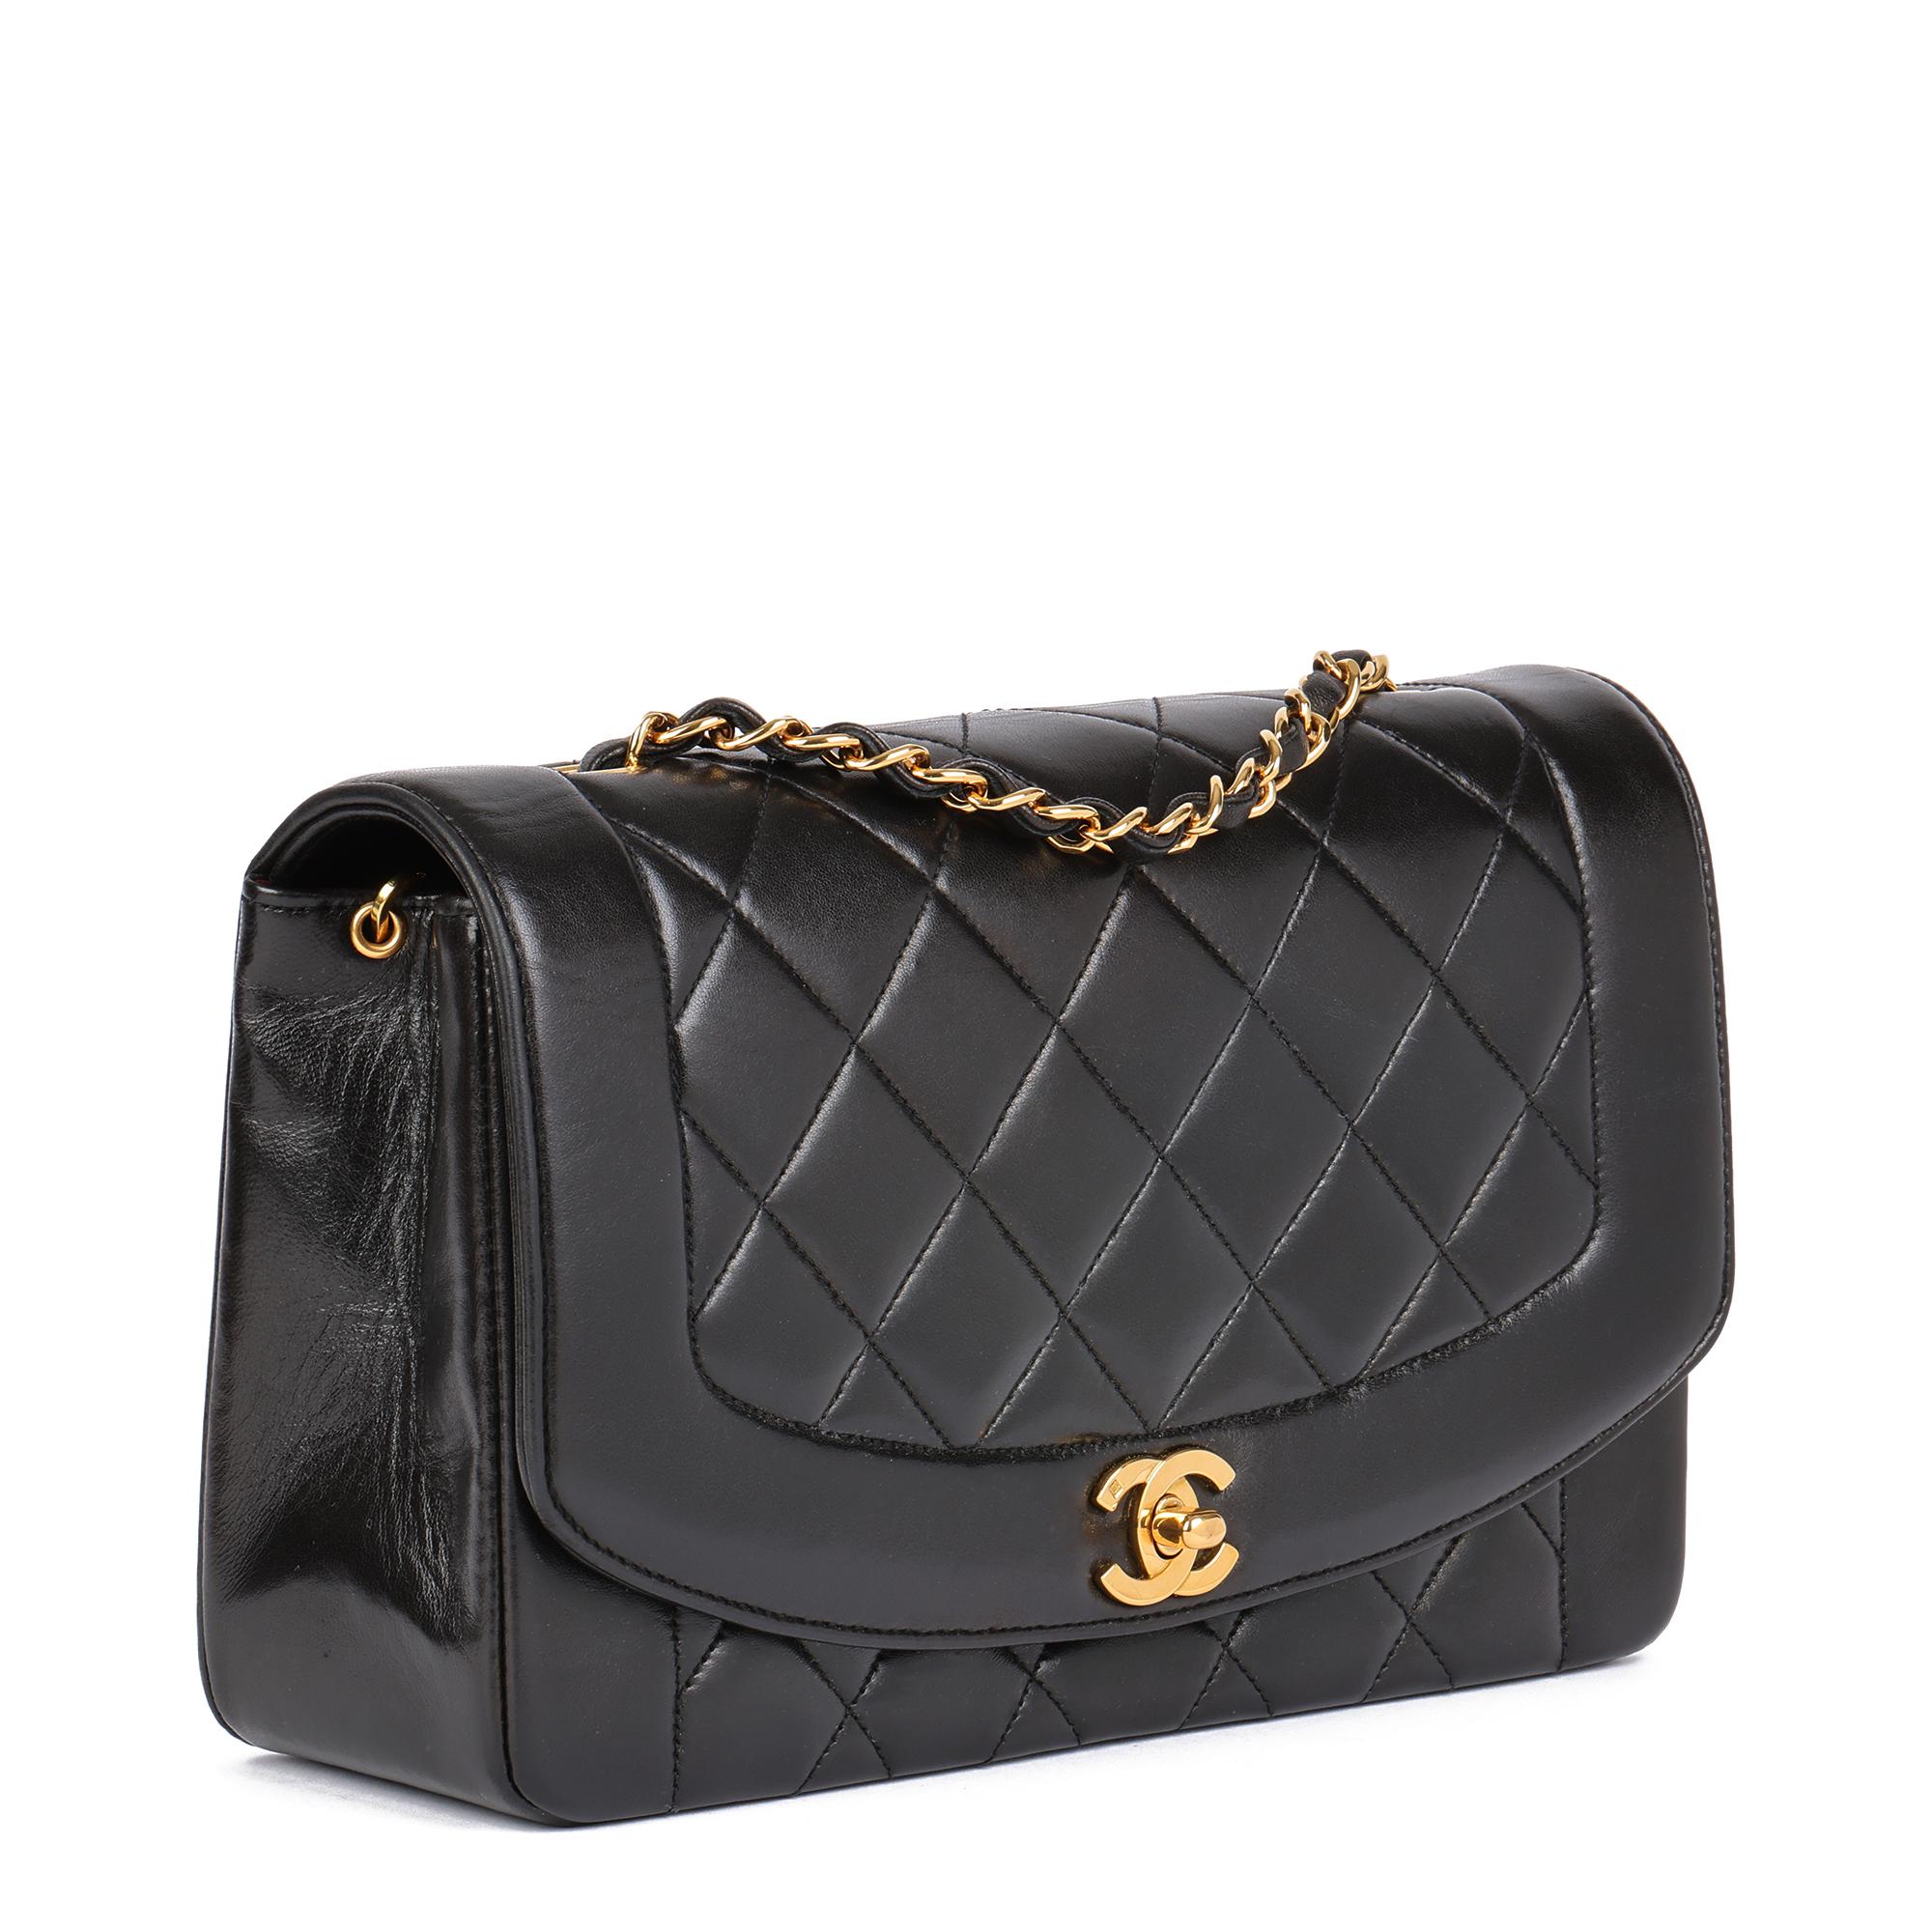 CHANEL
Black Quilted Lambskin Vintage Medium Diana Classic Single Flap Bag

Xupes Reference: HB4686
Serial Number: 2849701
Age (Circa): 1993
Accompanied By: Chanel Dust Bag, Box, Authenticity Card
Authenticity Details: Authenticity Card, Serial